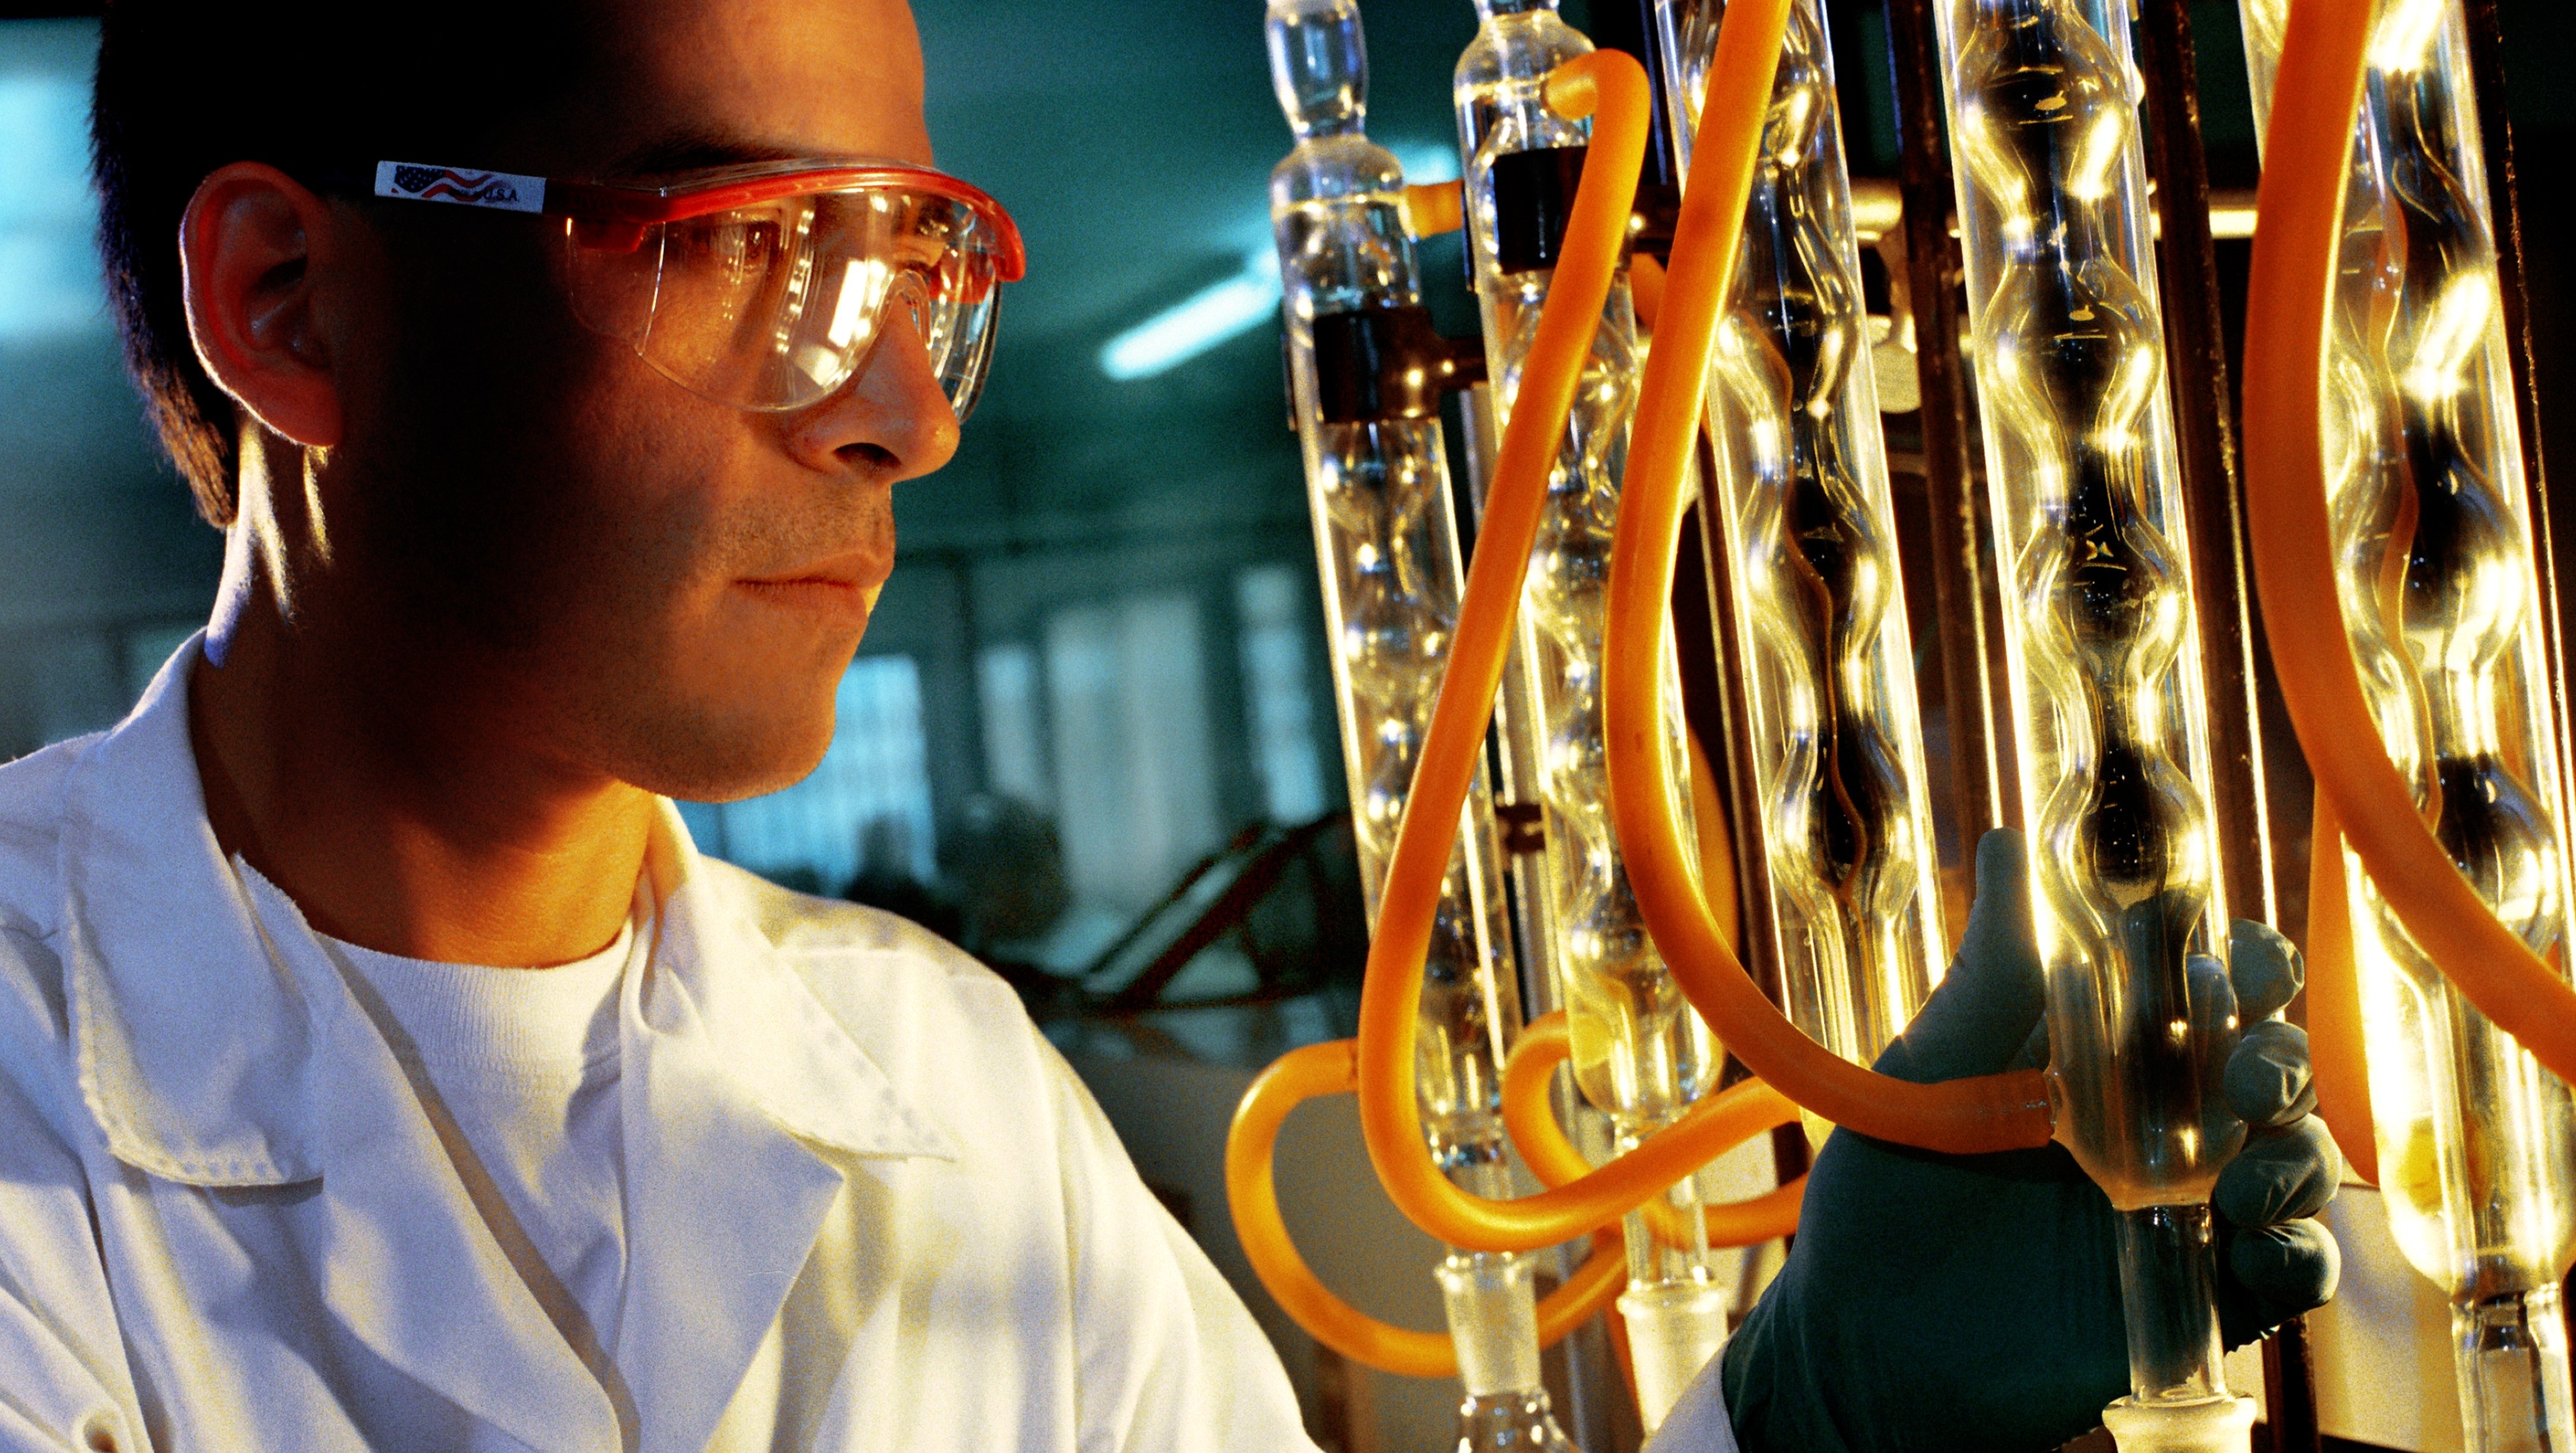 Man in labcoat and safety goggles ensuring quality assurance in lab